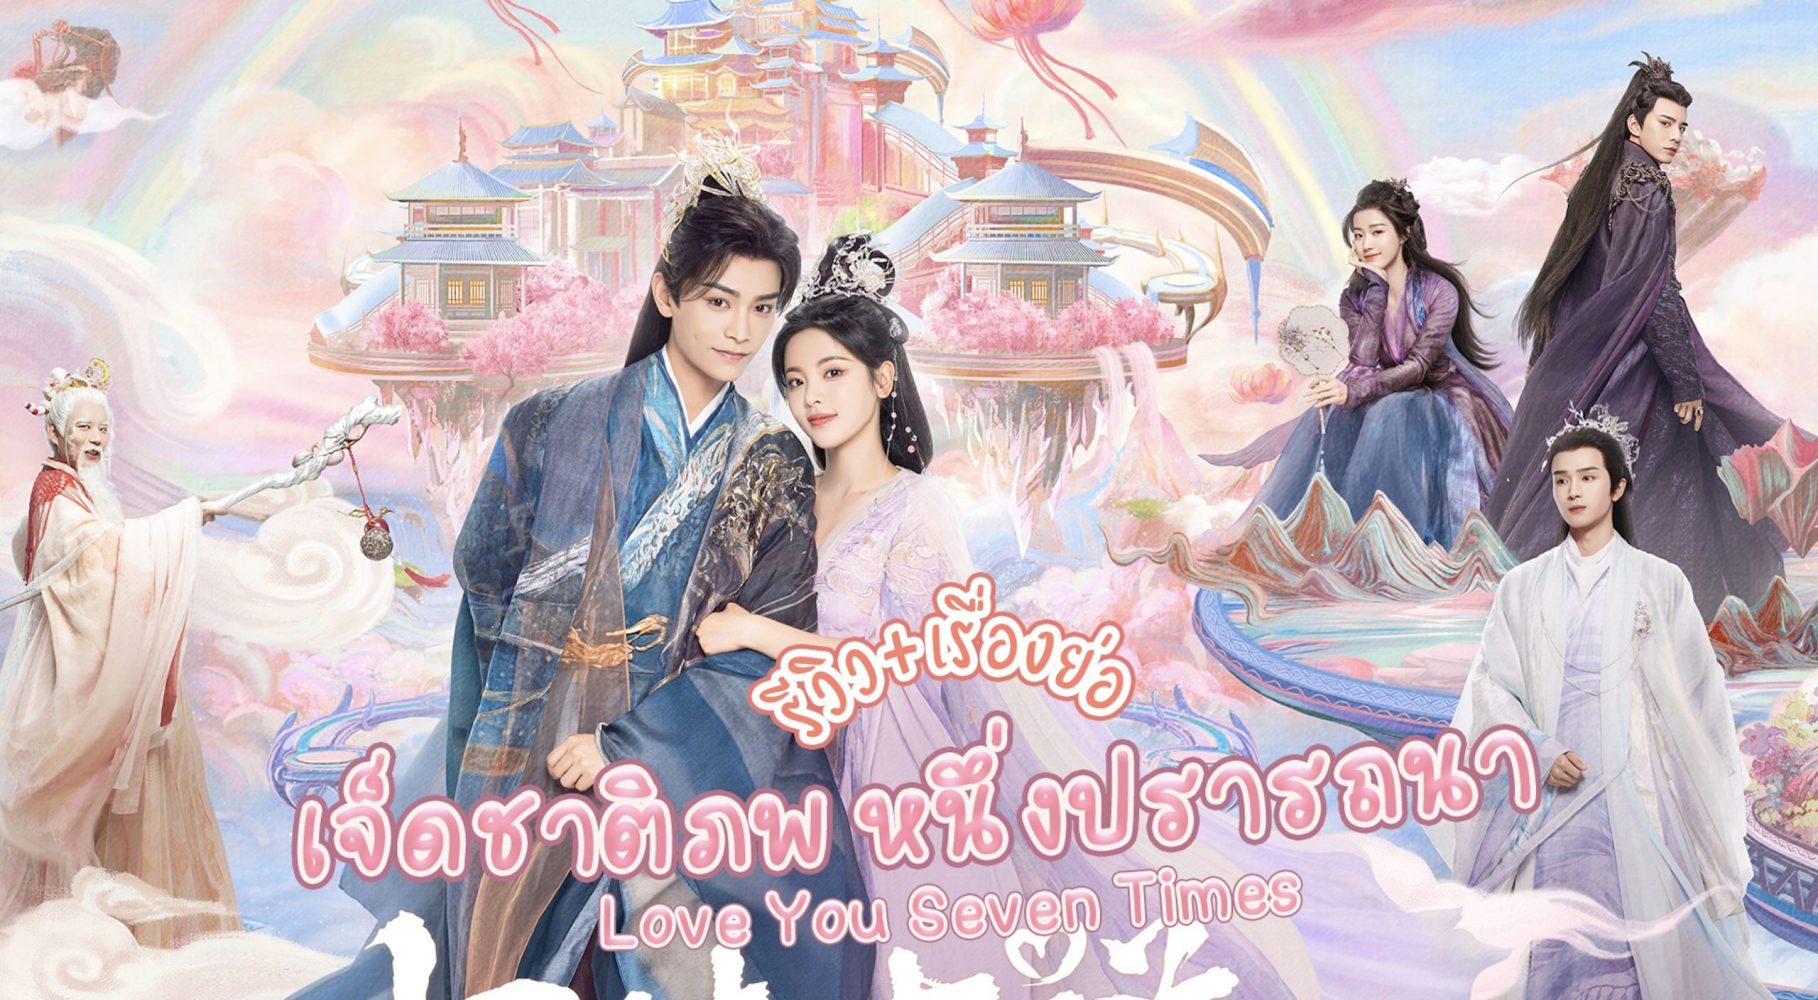 Bảy kiếp may mắn (Love You Seven Times) 